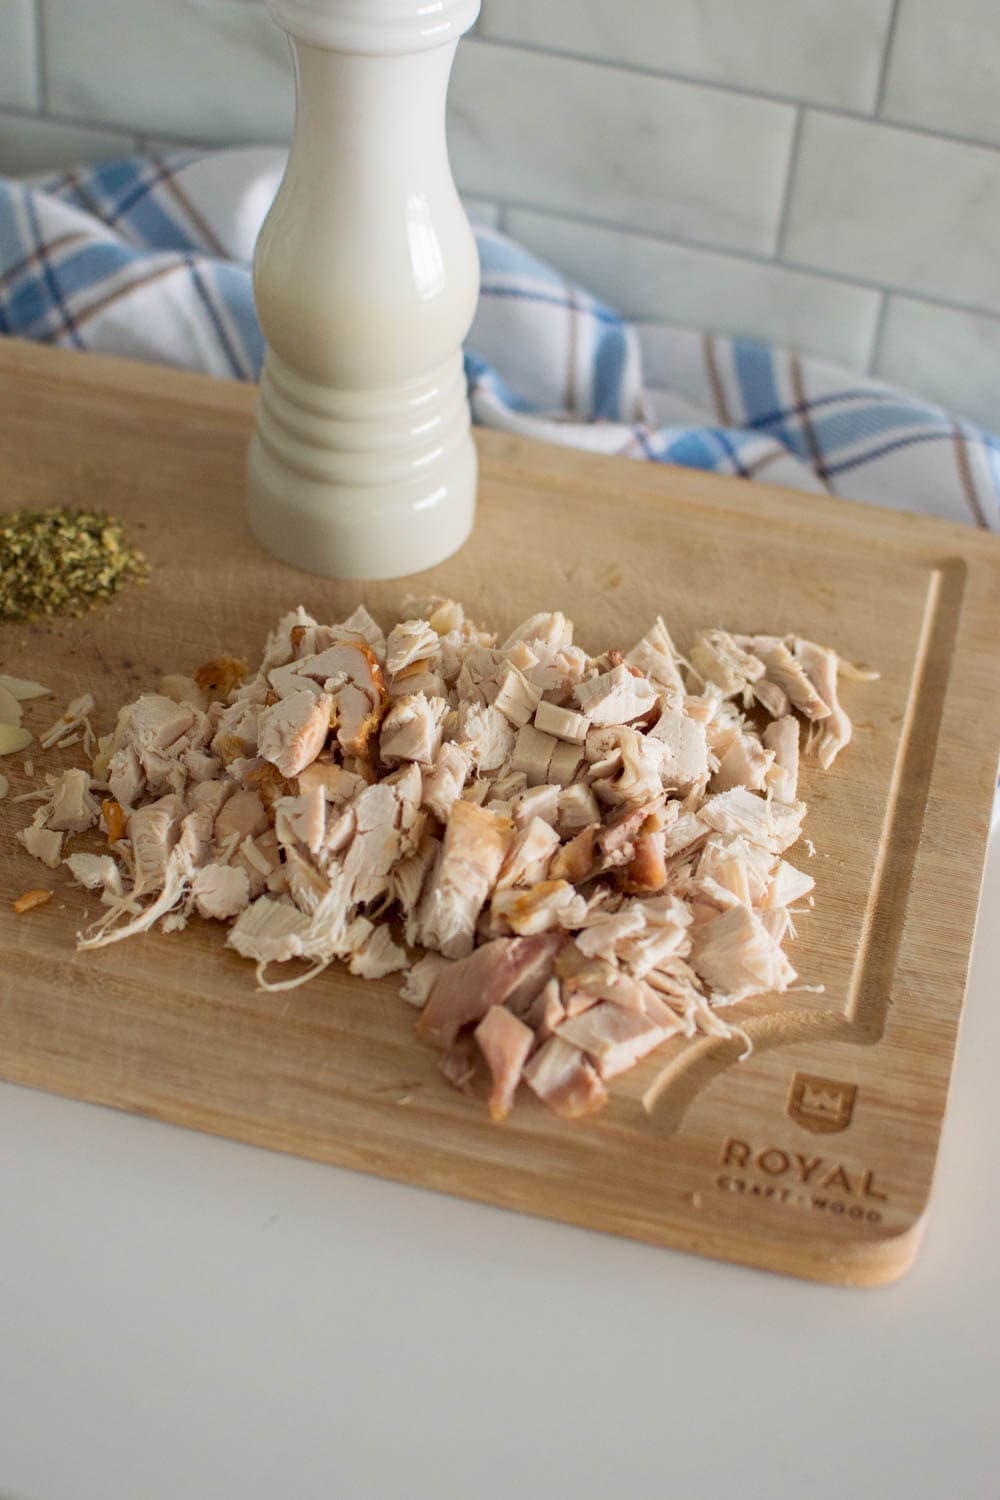 Precooked chicken, cut into small pieces on a wooden cutting board